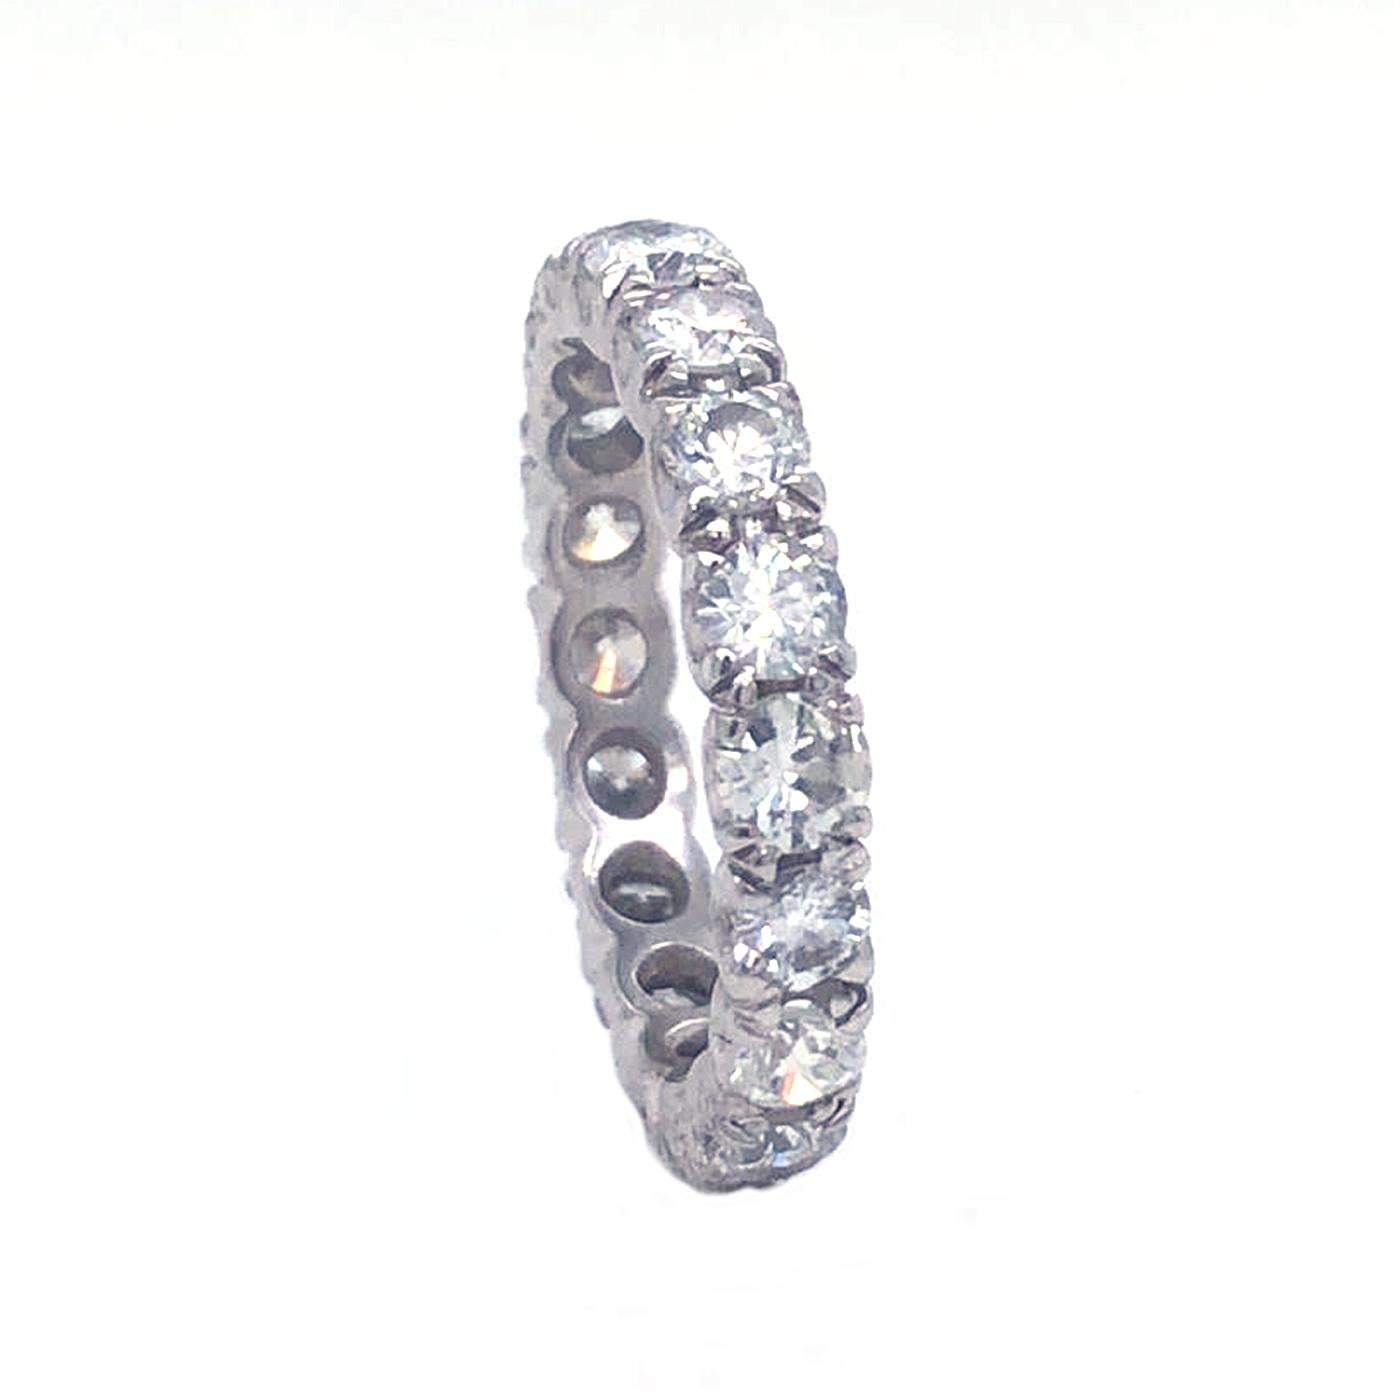 This gorgeous classic eternity band is perfect for everyone, This ring is made from 4.5 Grams of Platinum, 18 beautiful VS1, F Color diamonds totaling 1.93 Carats are sell all the way around the band for the perfect balance of Platinum to diamonds